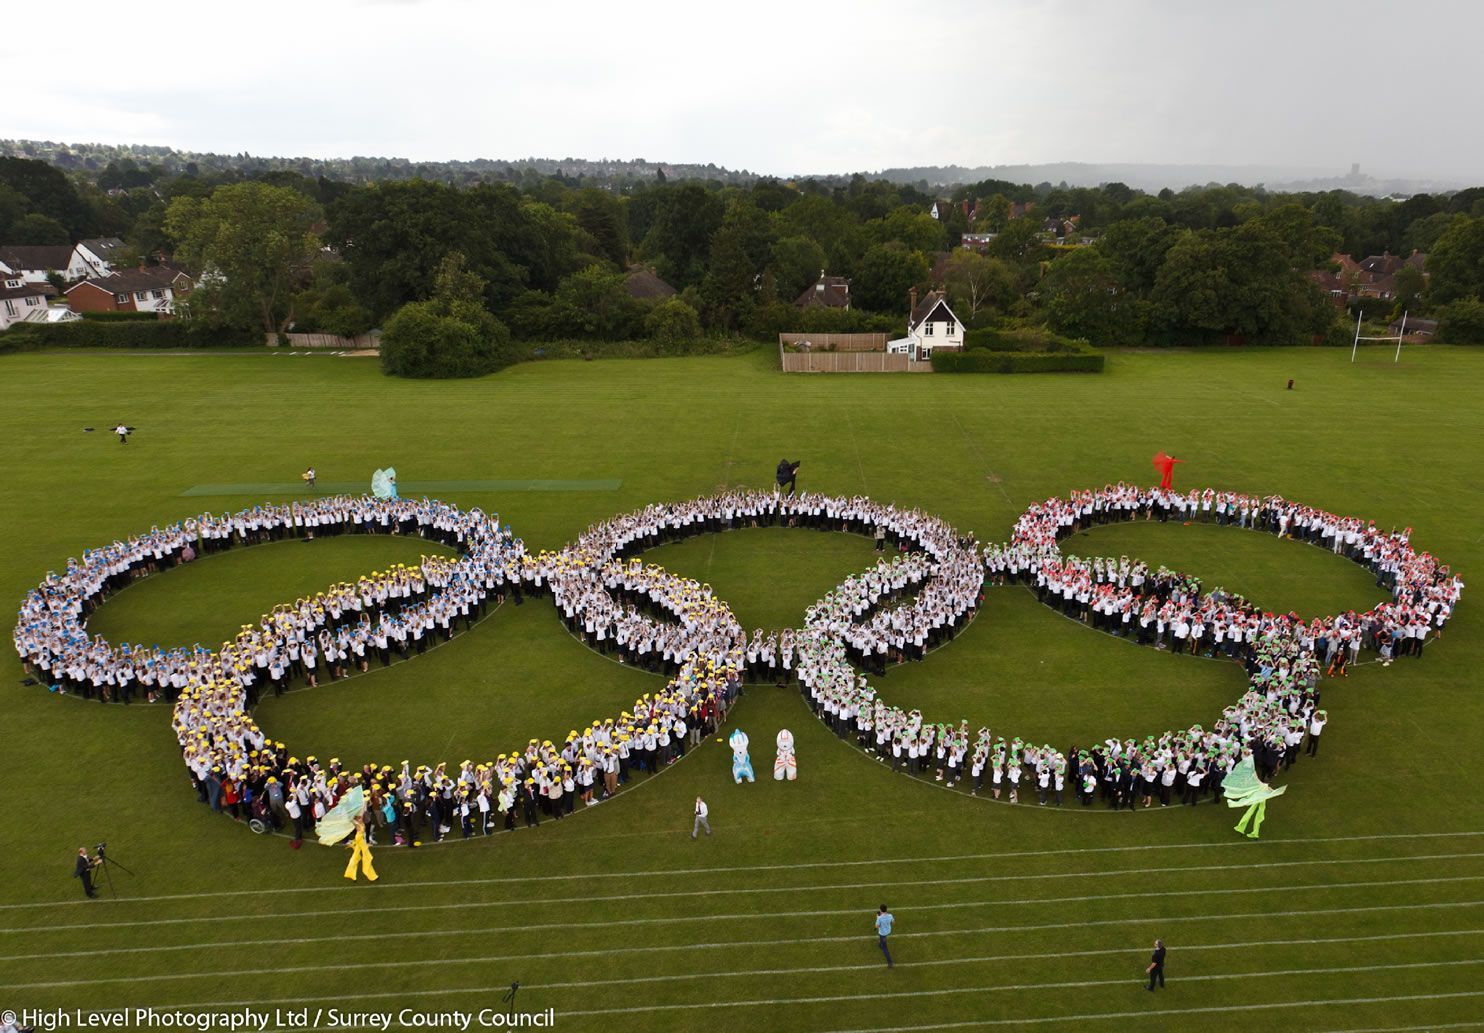 argest Human Olympic Rings: UK school kids sets world record (Video)
